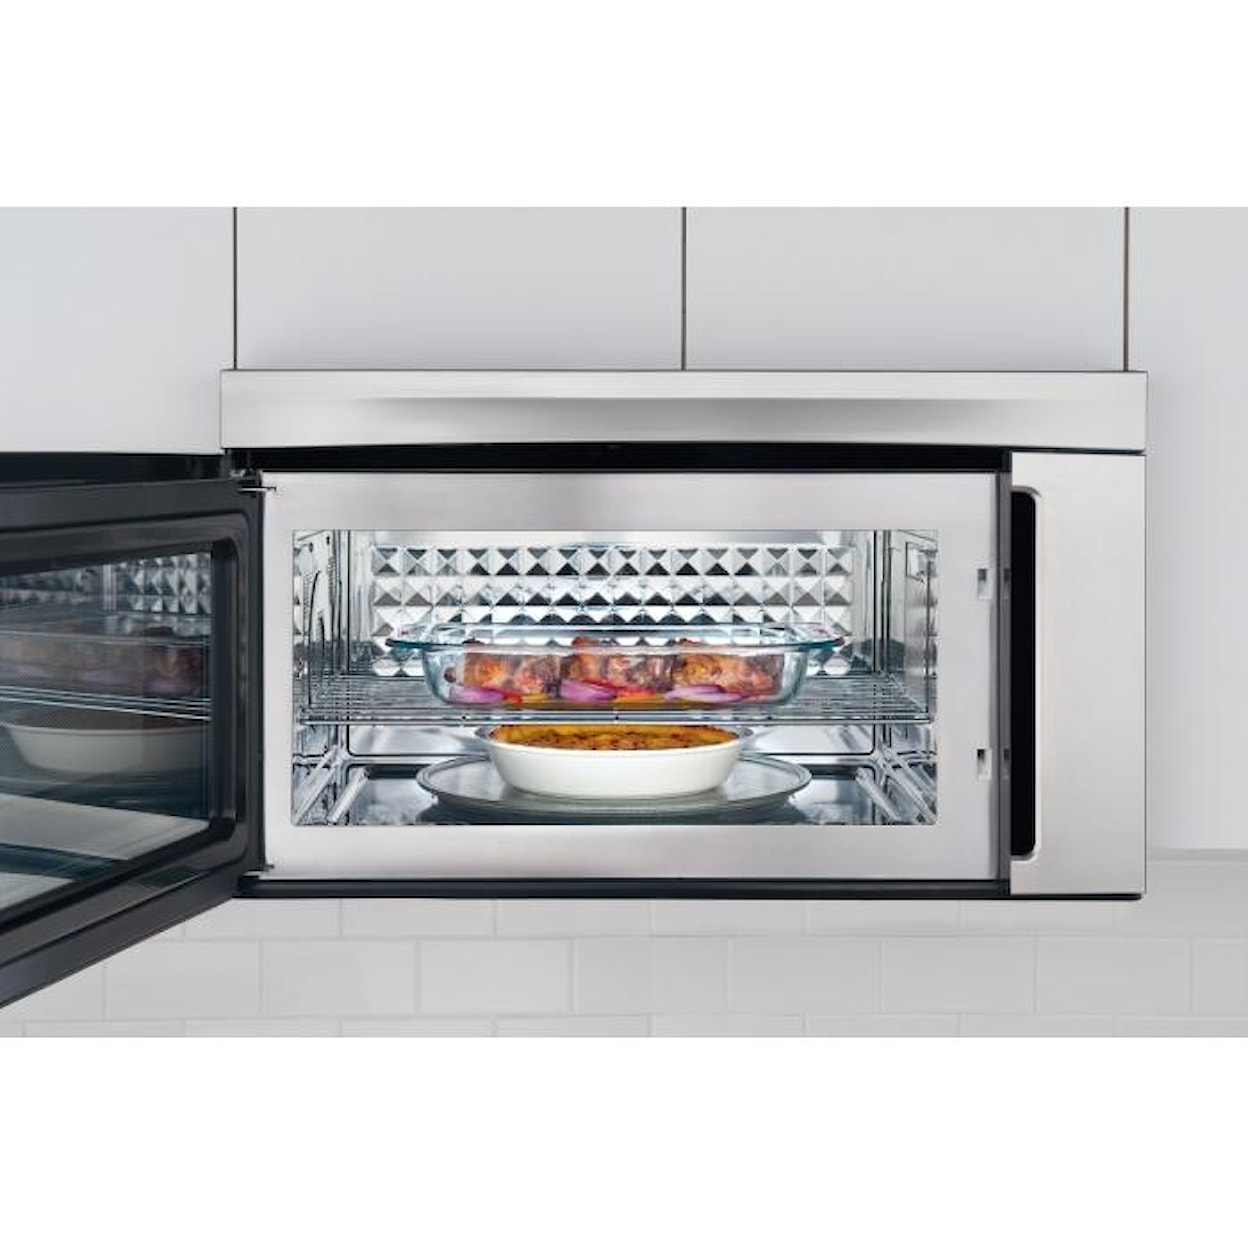 Electrolux Microwaves 1.8 Cu. Ft. Over-The-Range Microwave